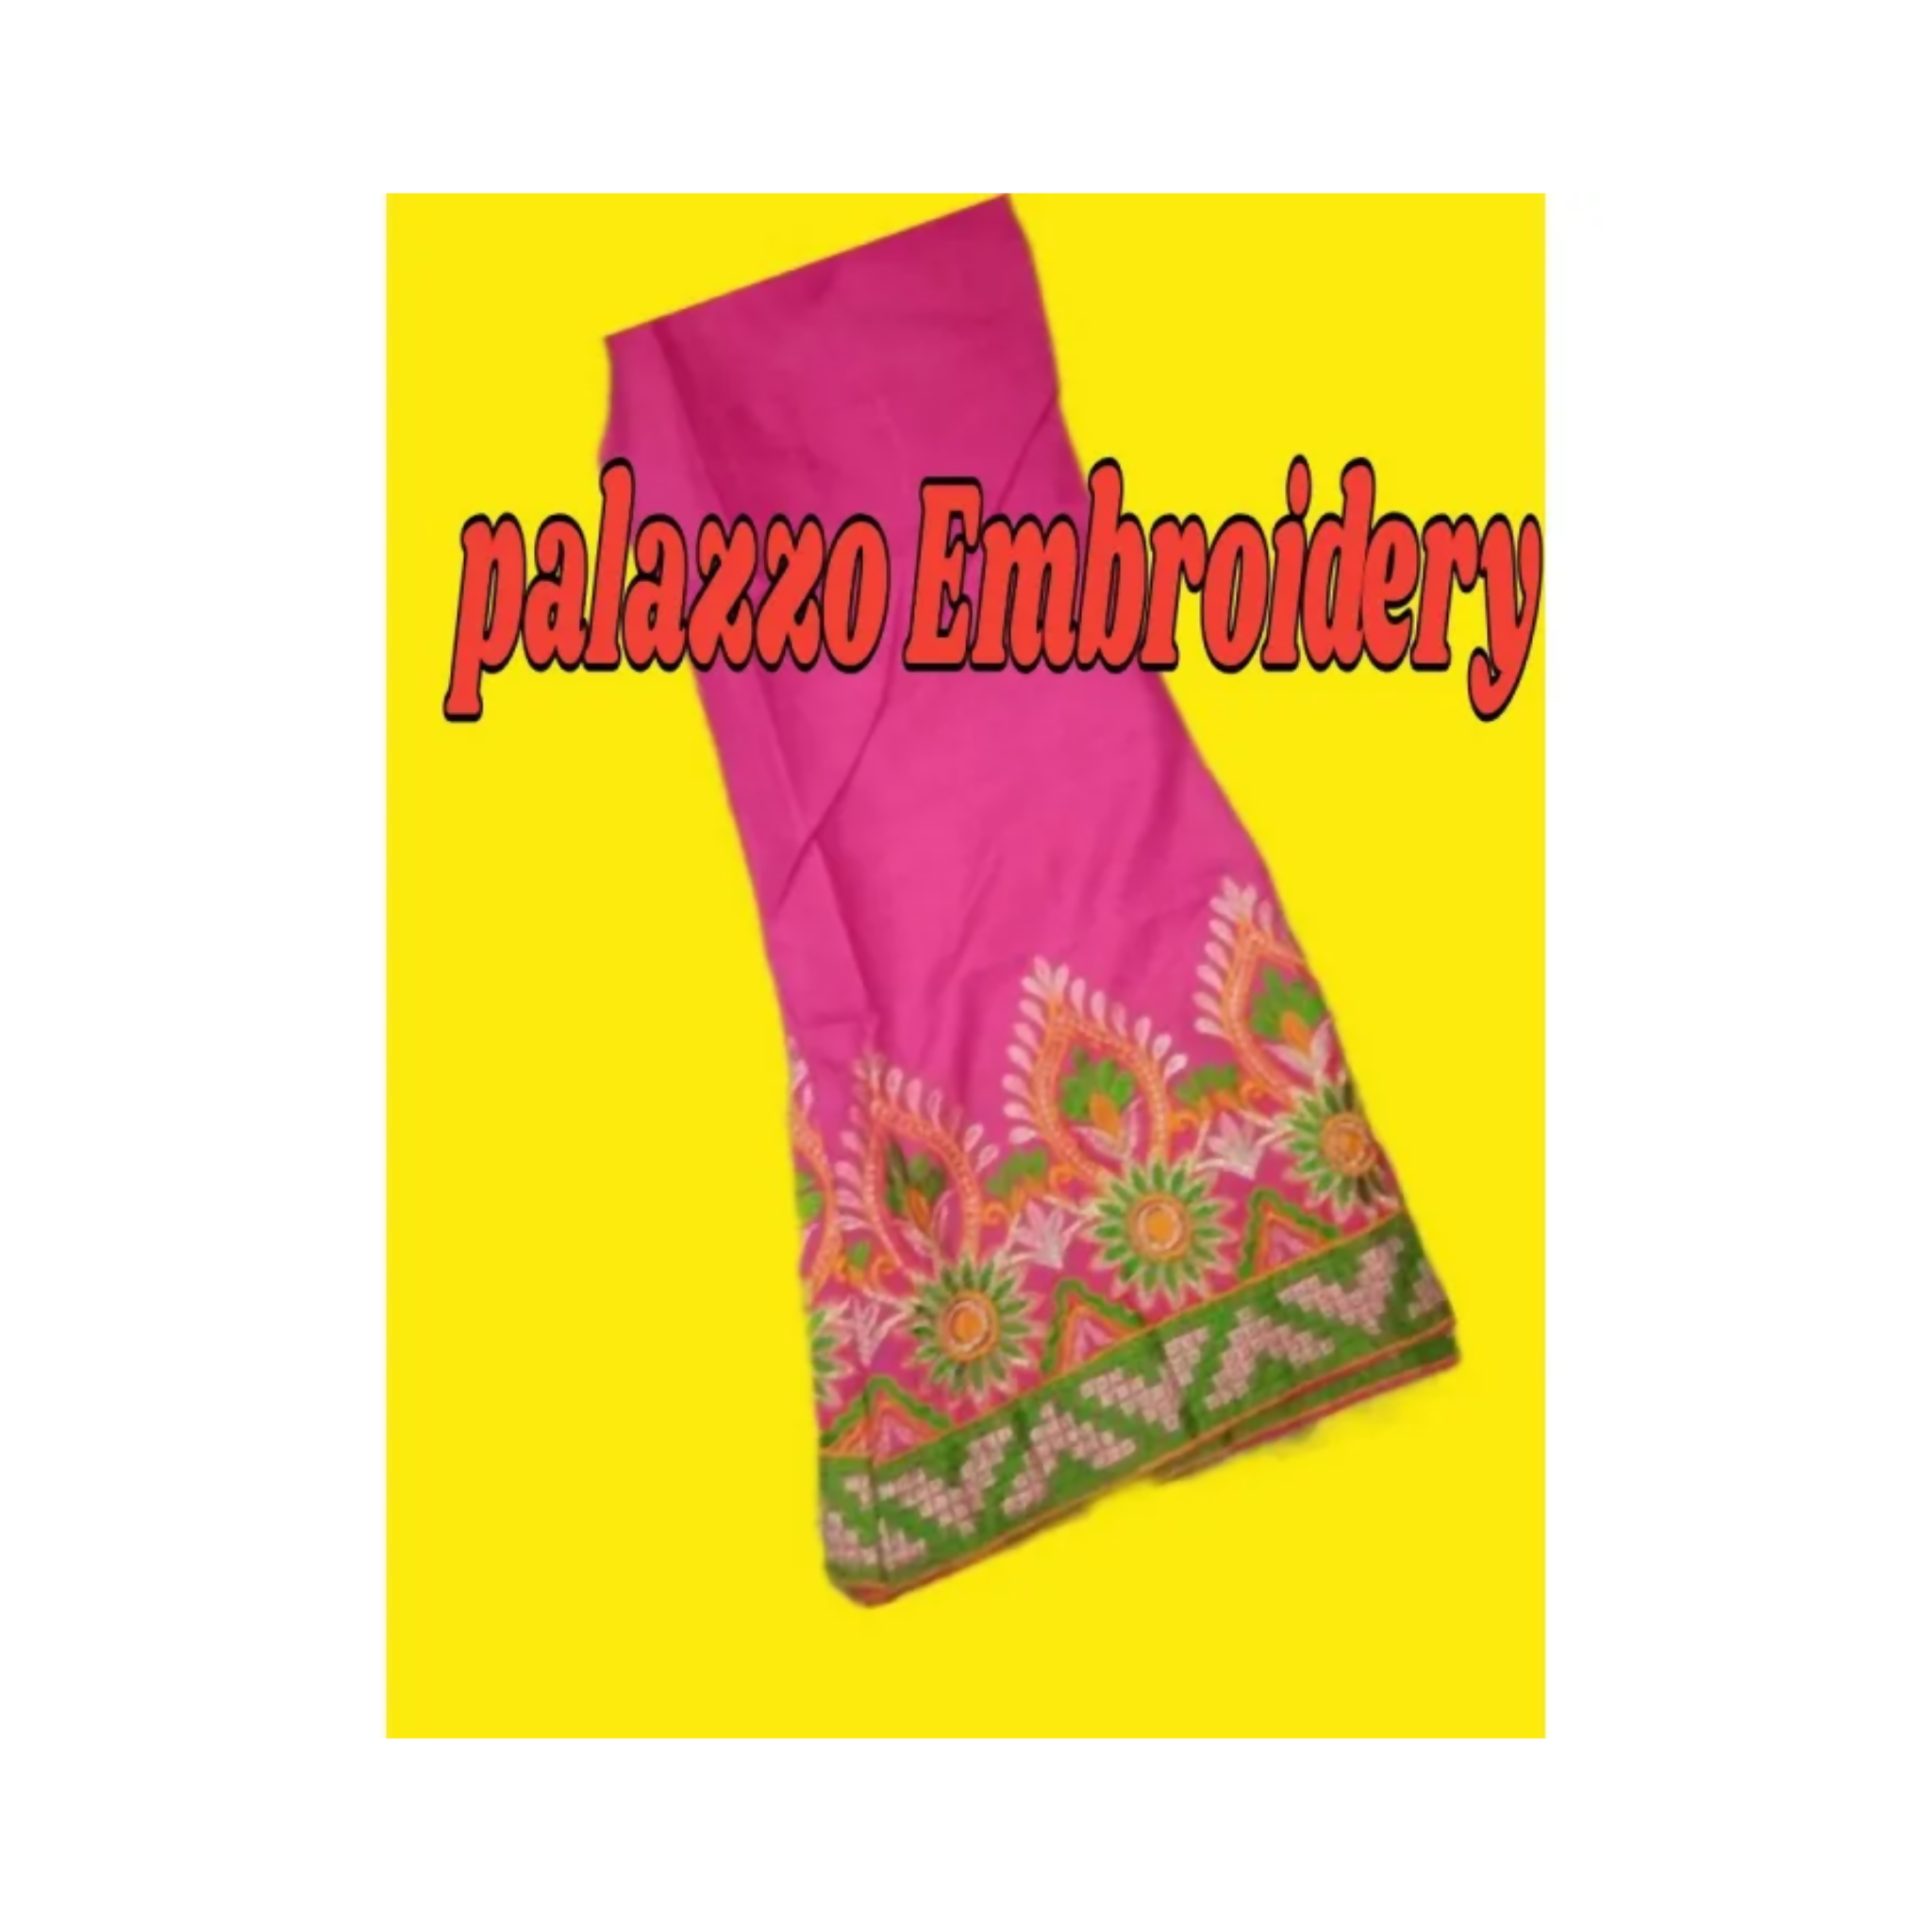 Palazzo, Elegant & Embroidered, for Girls'